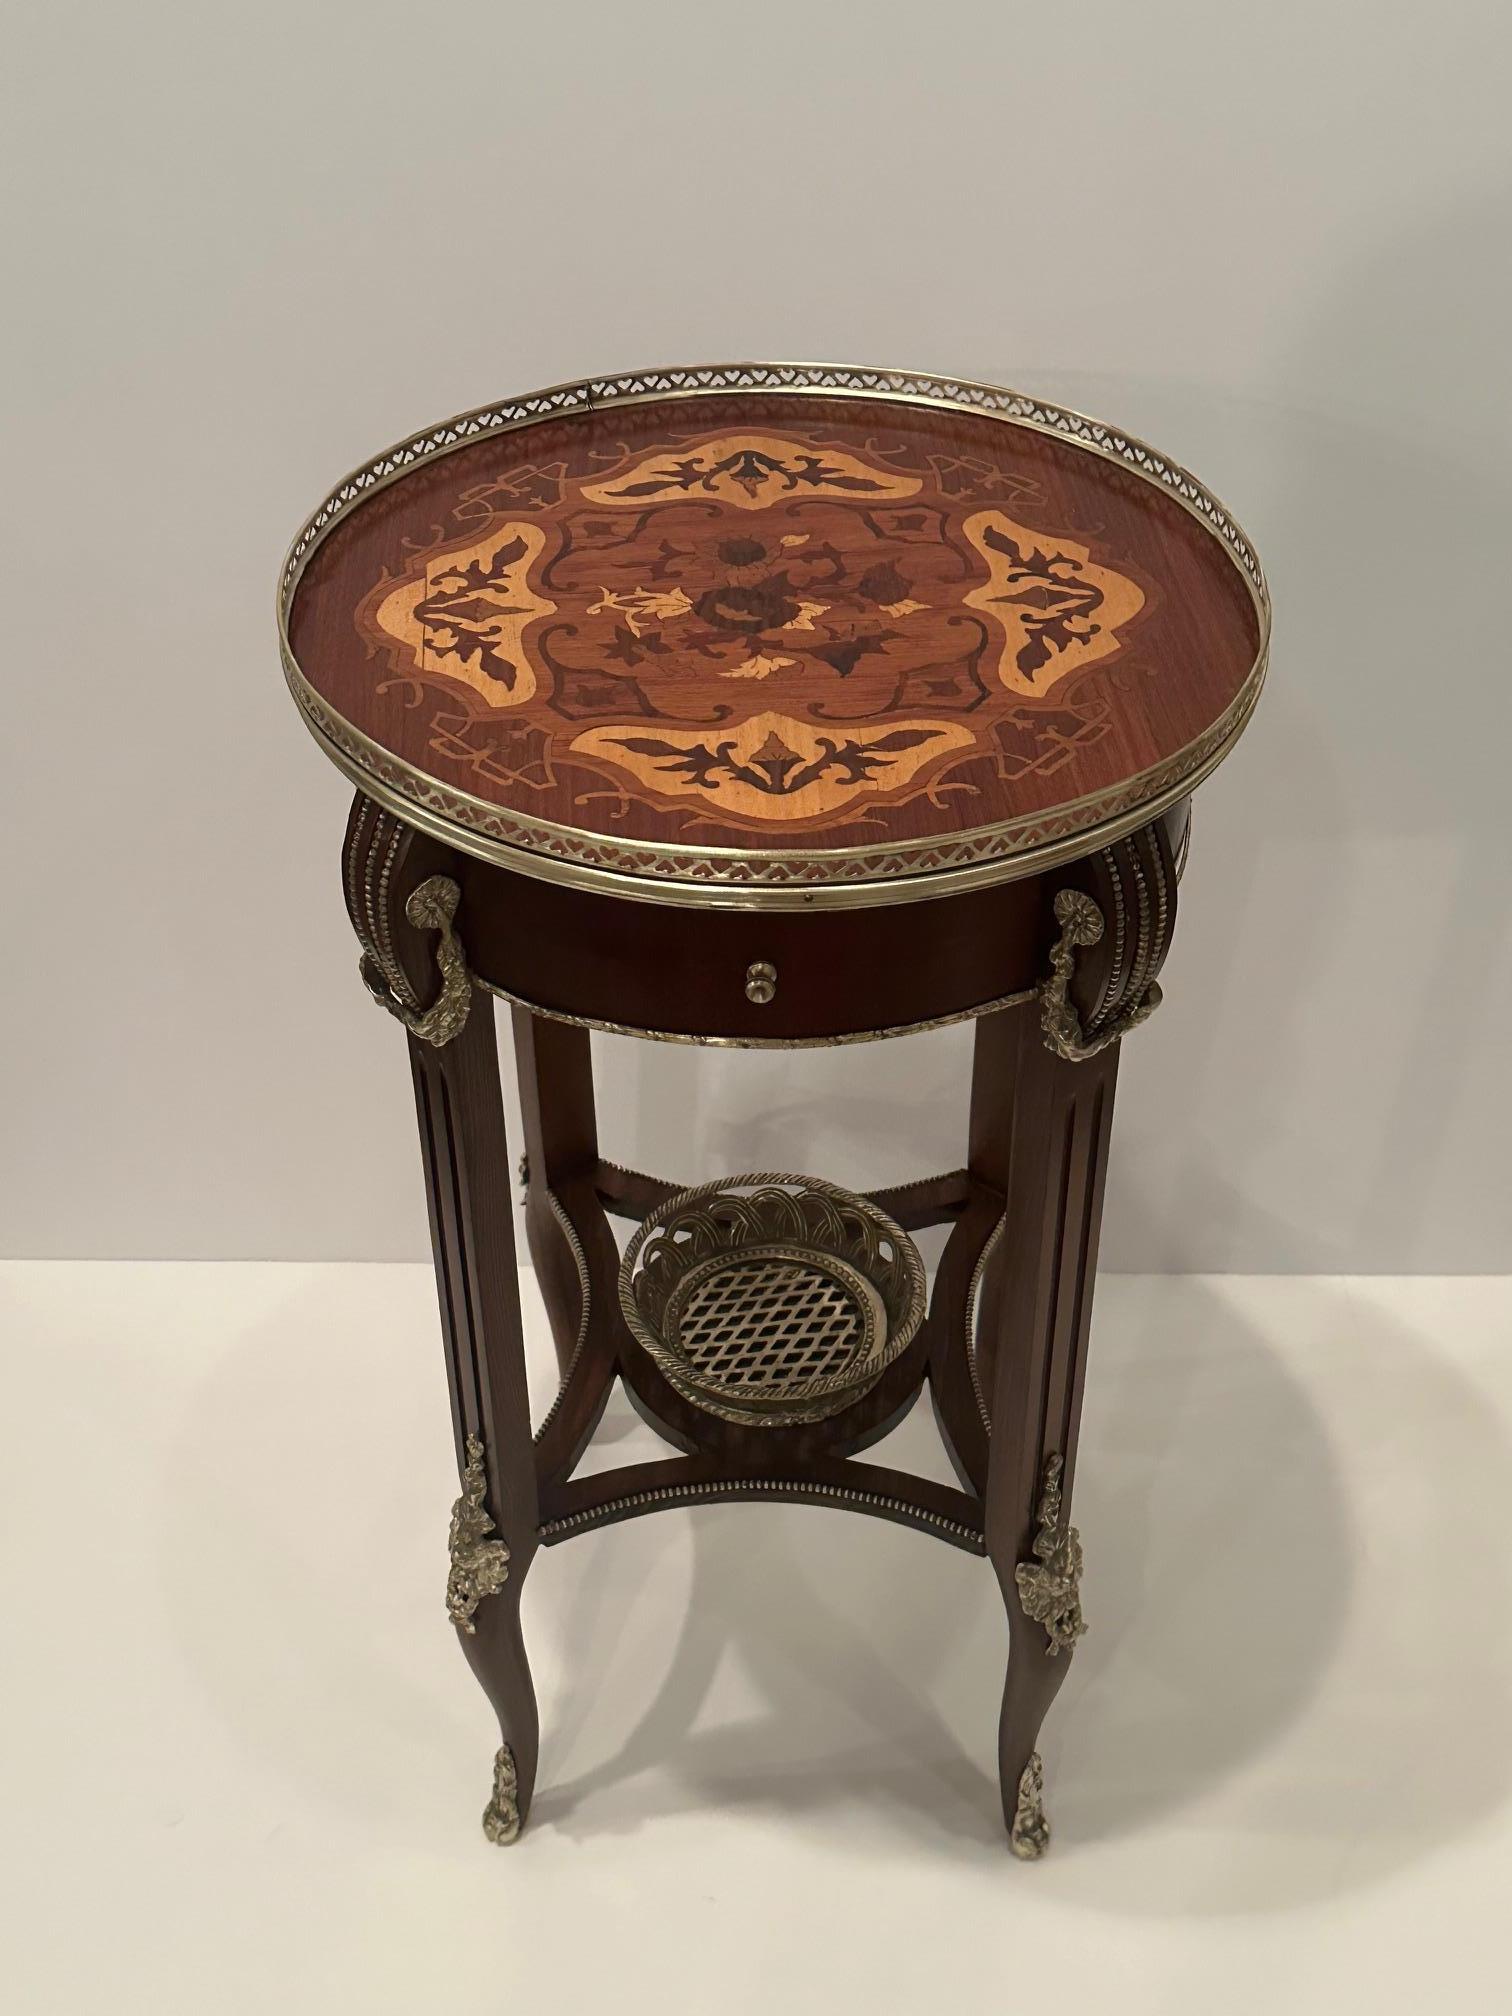 Sumptuous Round Mahogany Inlaid Side Table with Bronze Mounts In Good Condition For Sale In Hopewell, NJ